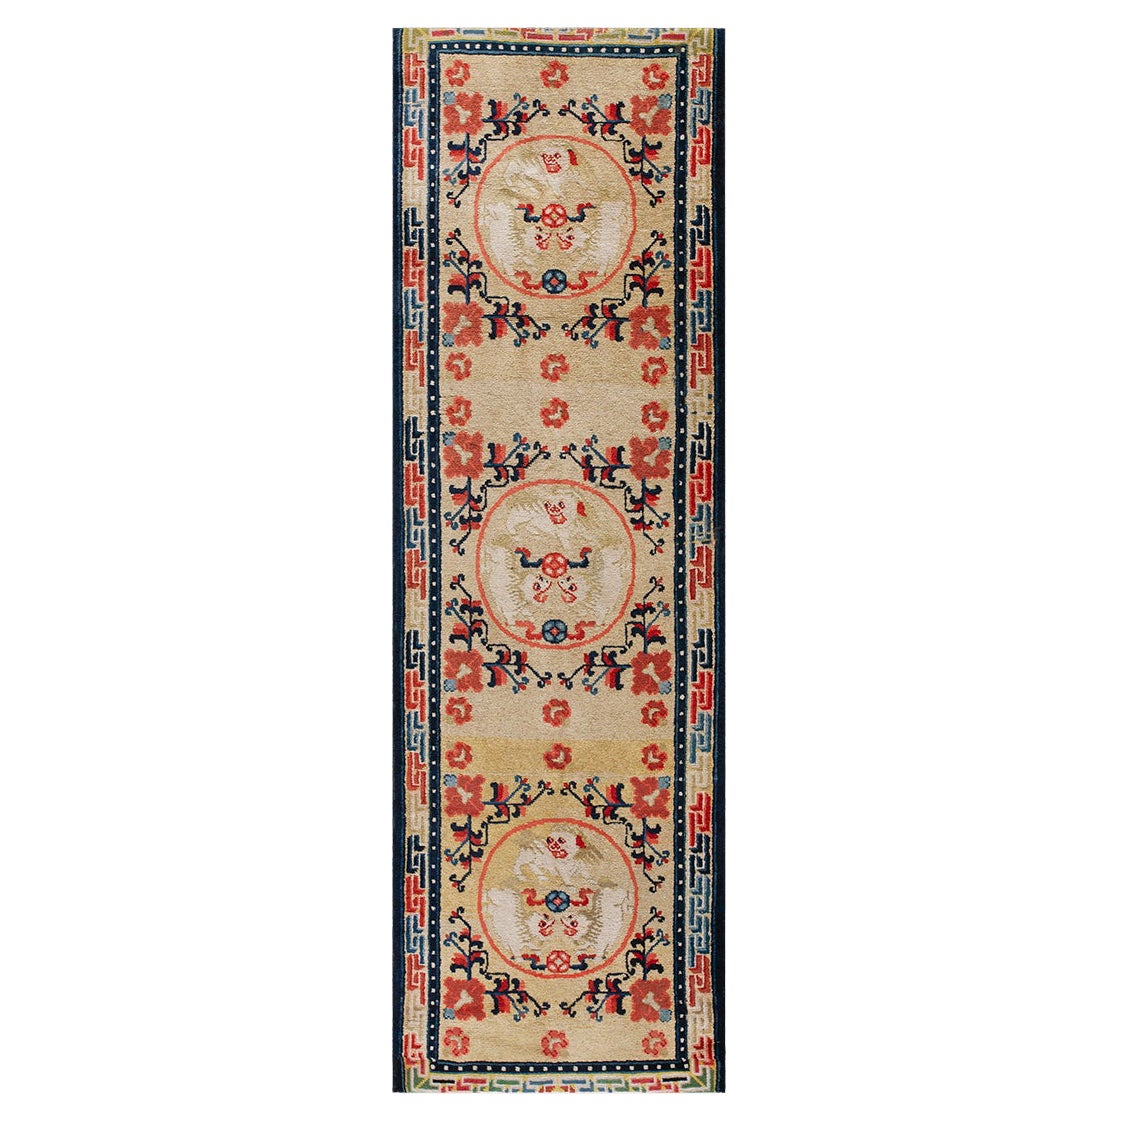 Late 19th Century W. Chinese Ningxia Runner Carpet ( 2'4" x 7'2" - 70 x 220 ) For Sale